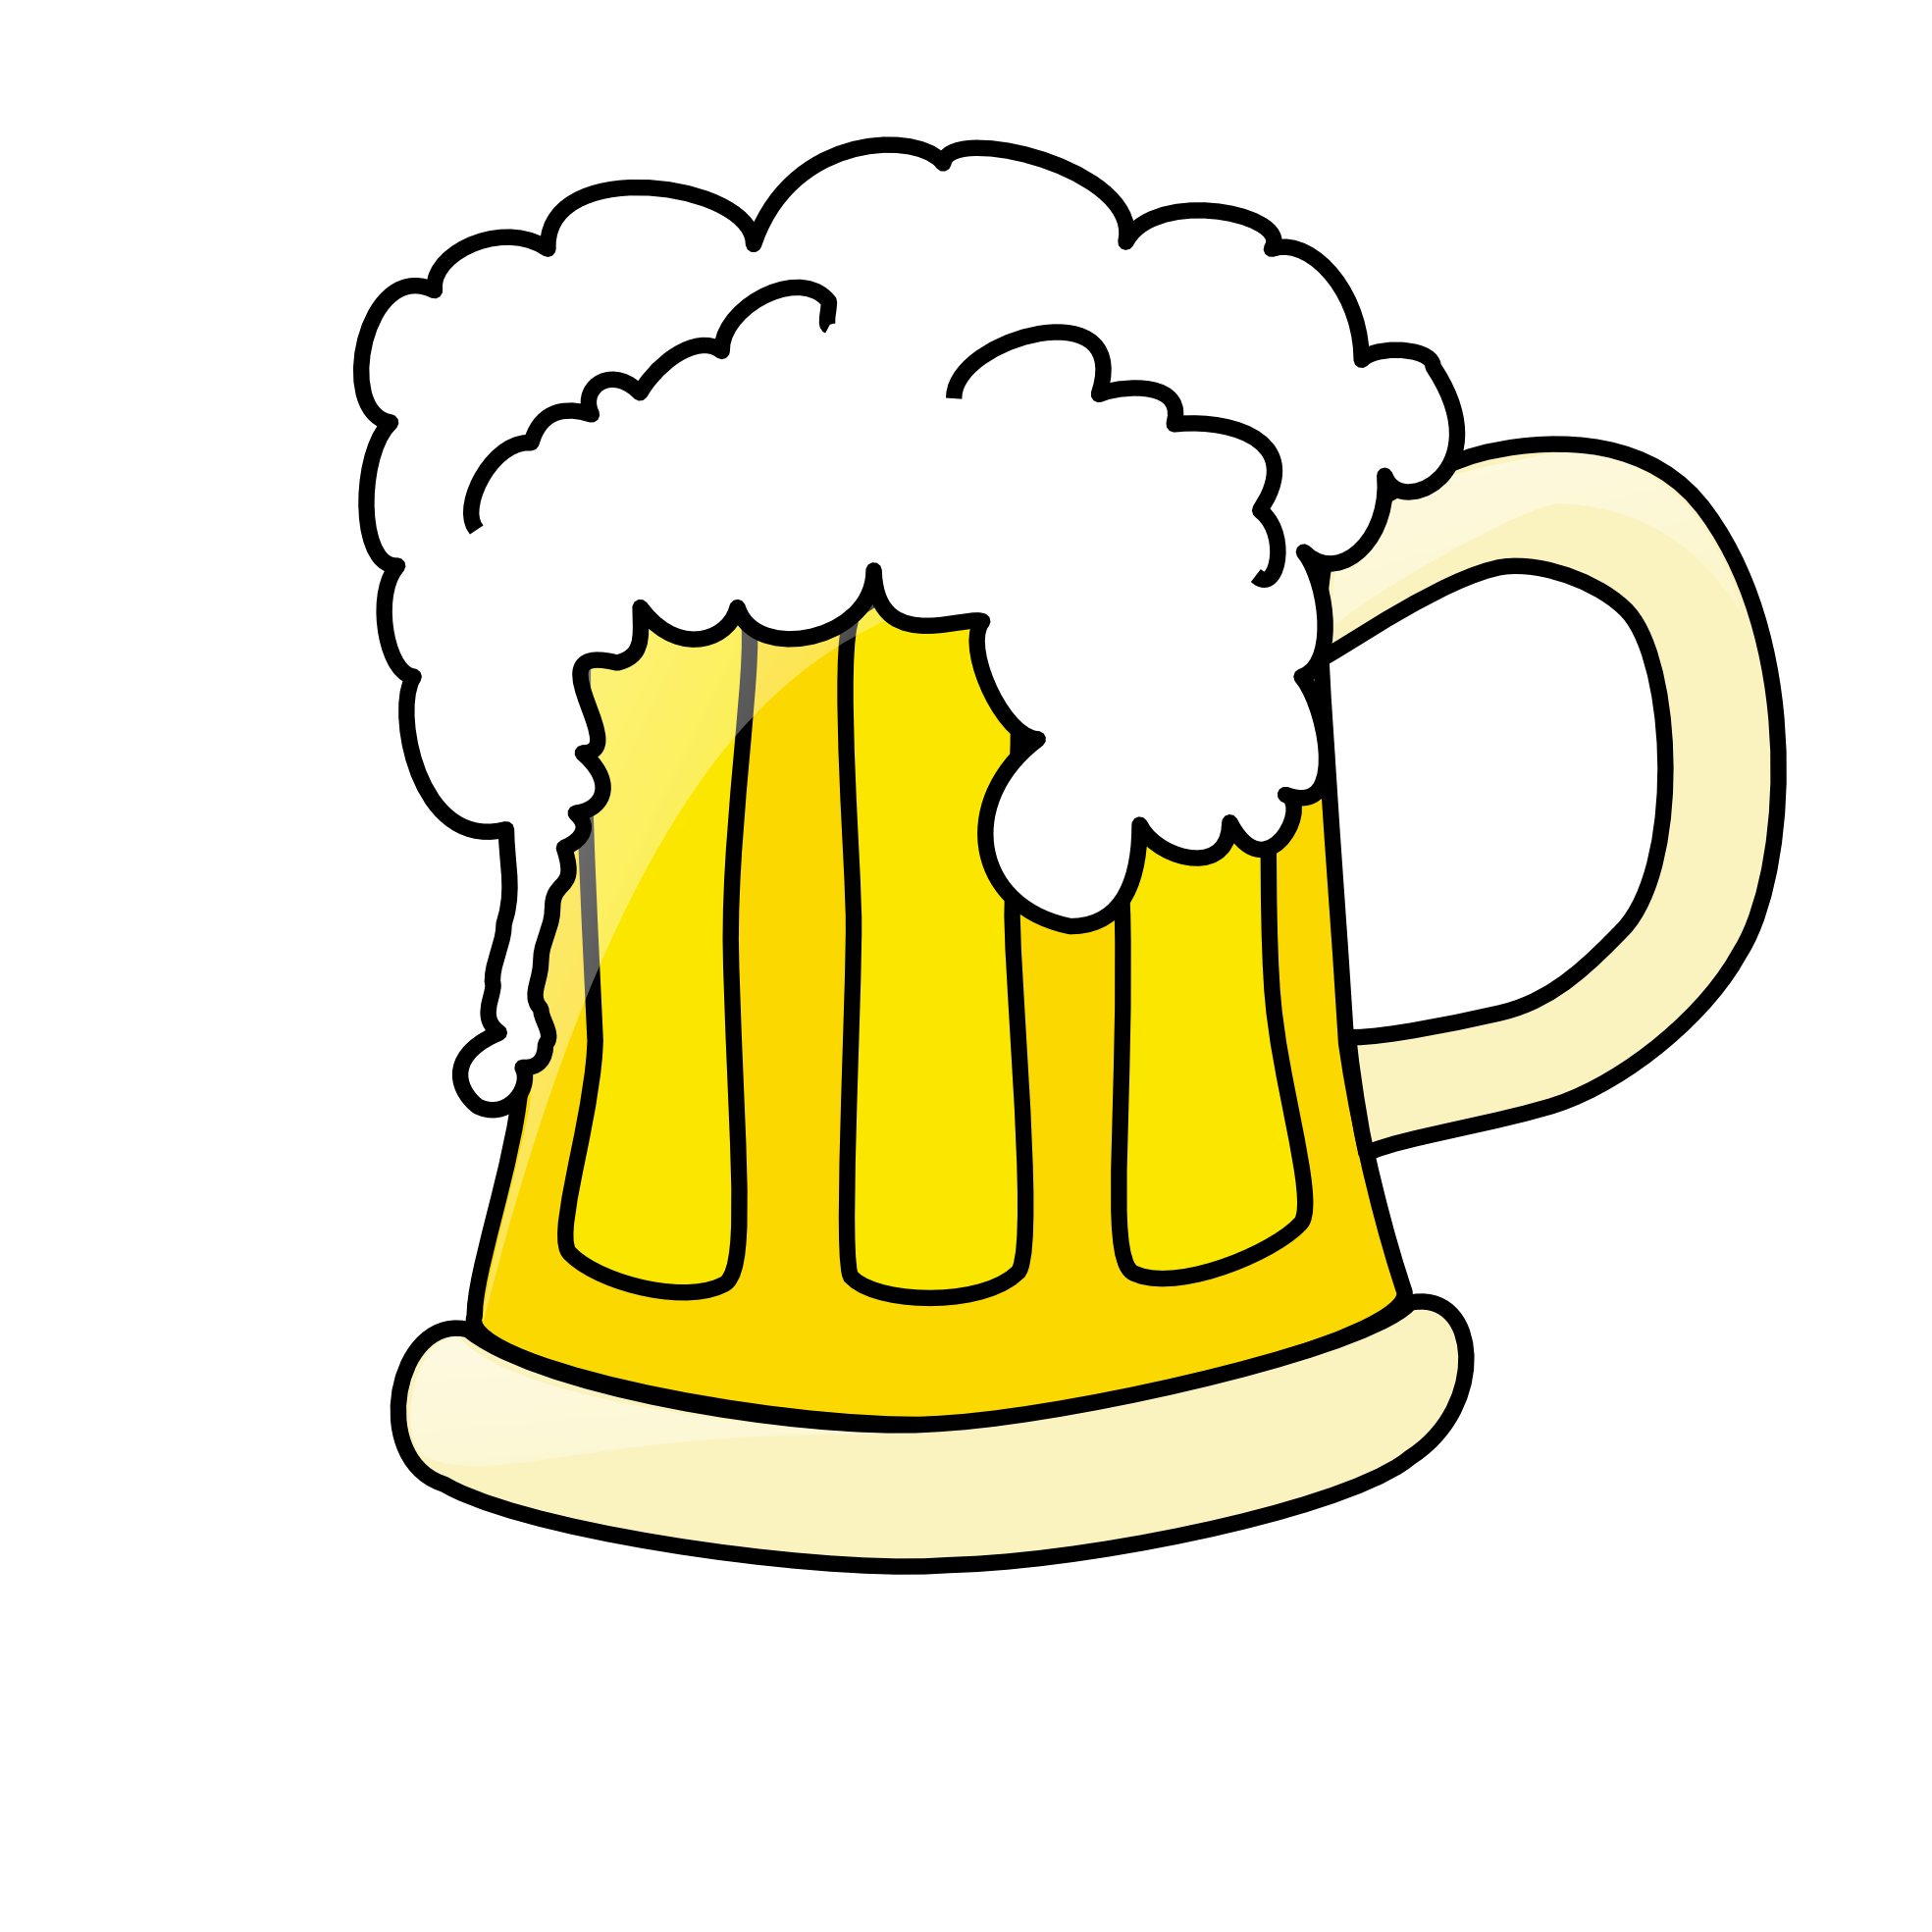 free beer tap clipart - photo #30